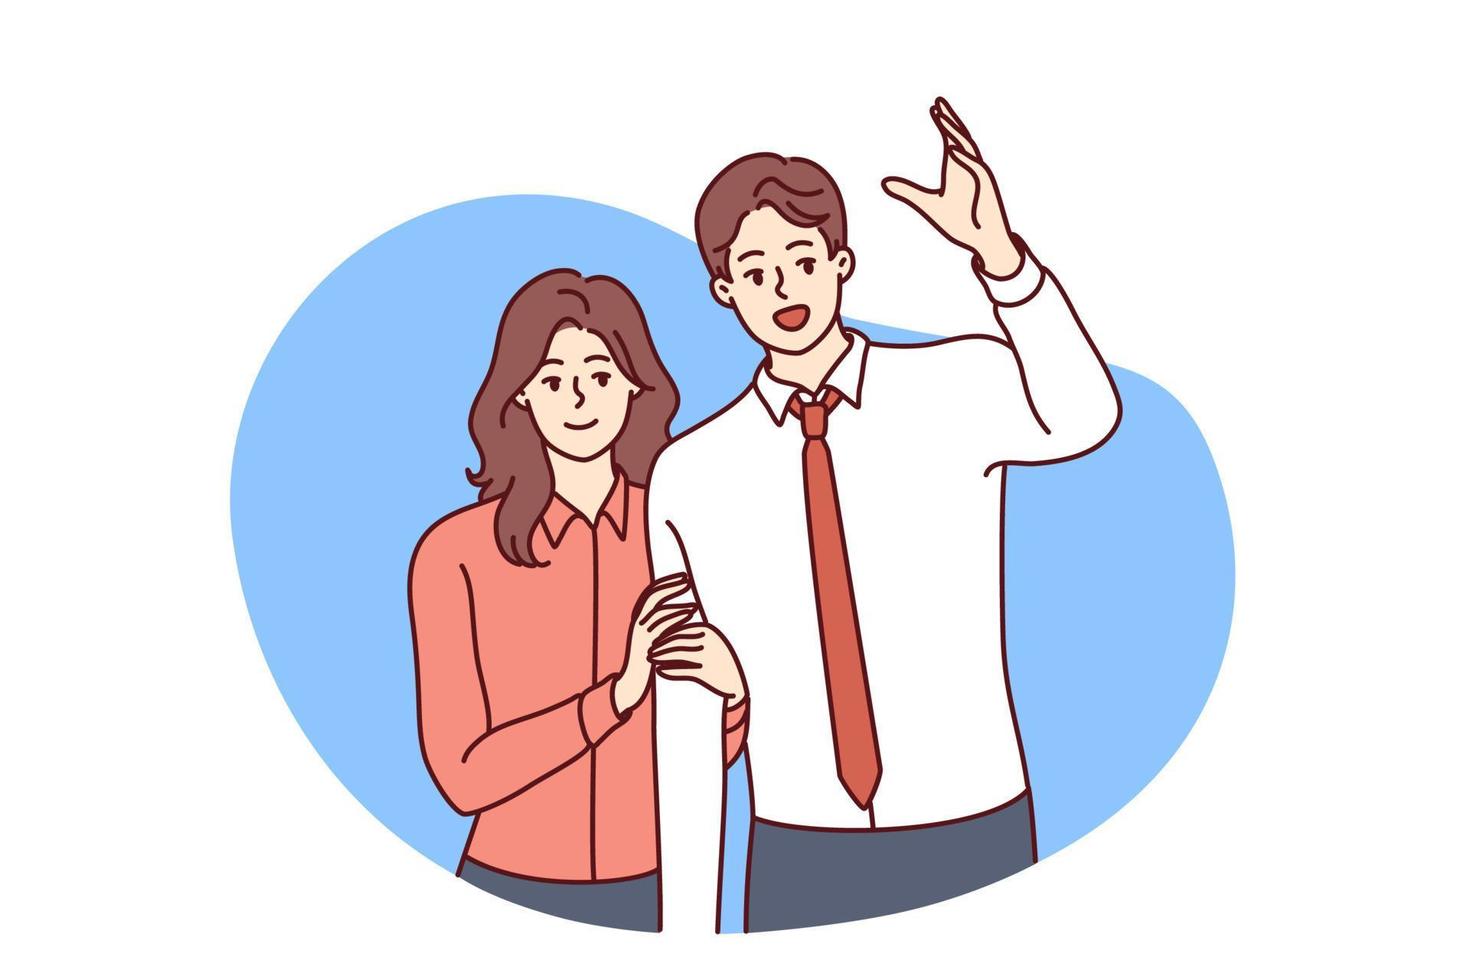 Man raising hand wanting to be noticed and modest smiling woman standing behind. Young family couple of guy in business clothes and girl dressed in casual style. Flat vector illustration